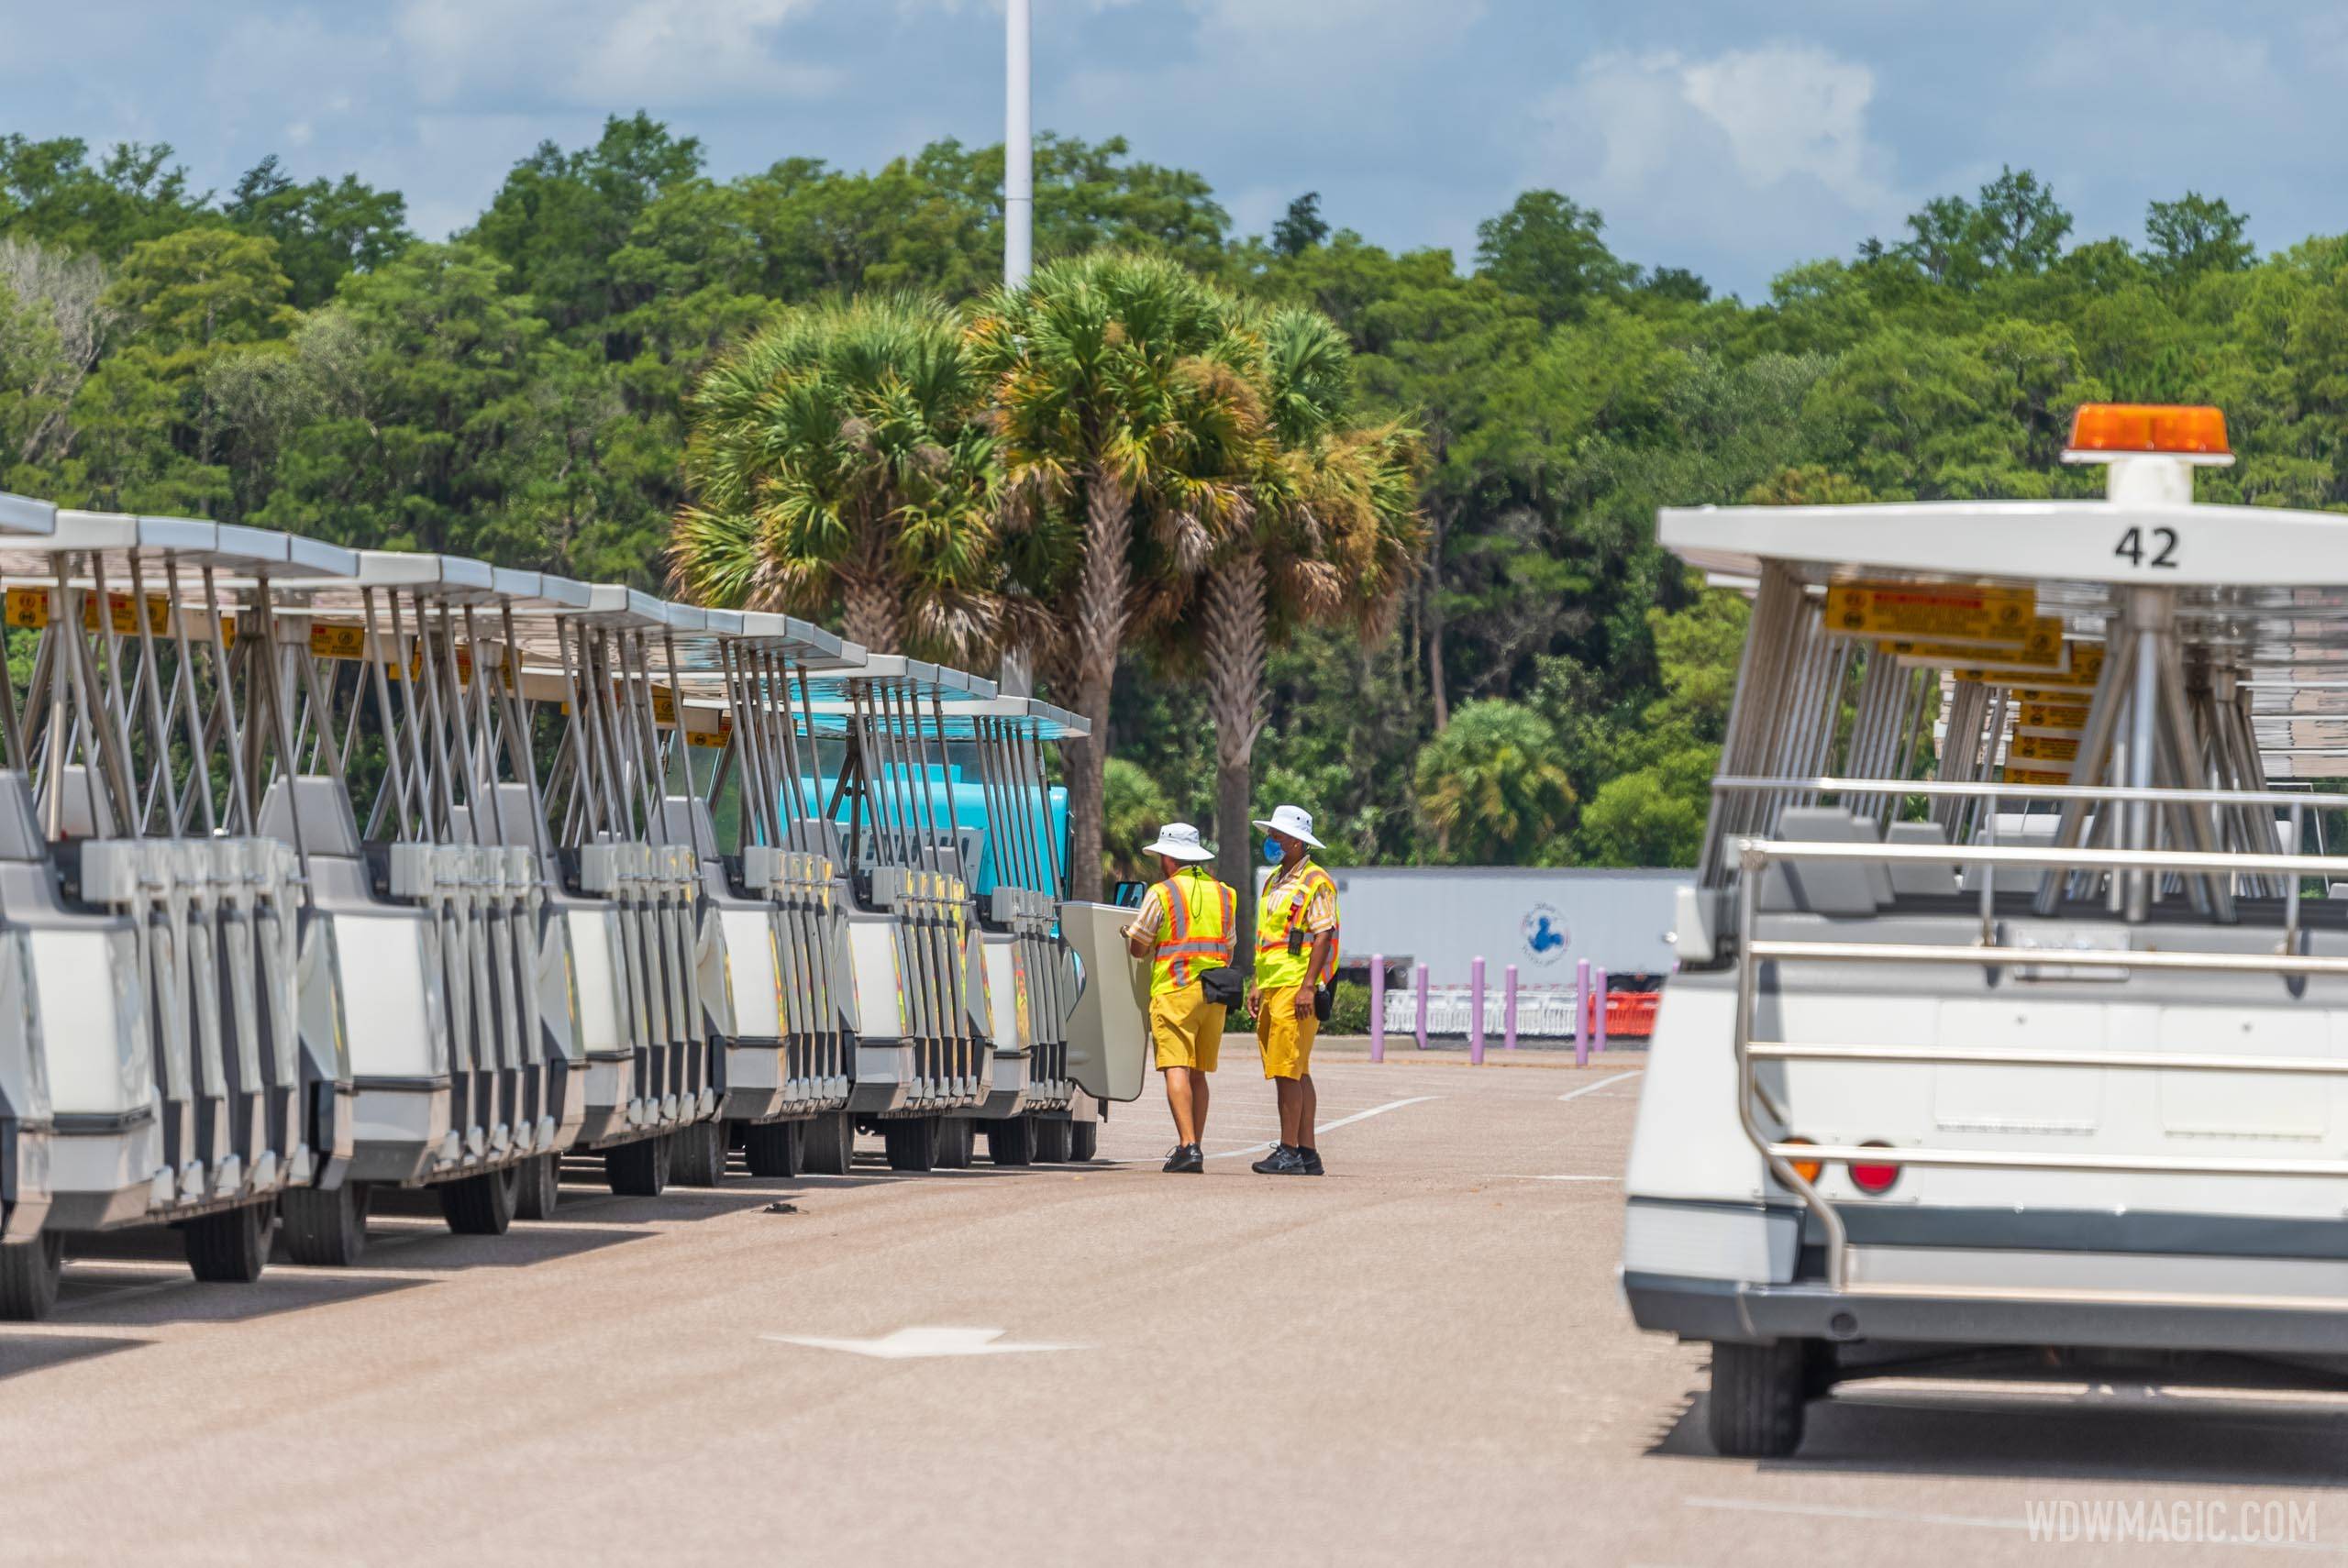 Tram fleet appears to be being readied for a return to service at the Magic Kingdom's Transportation and Ticket Center